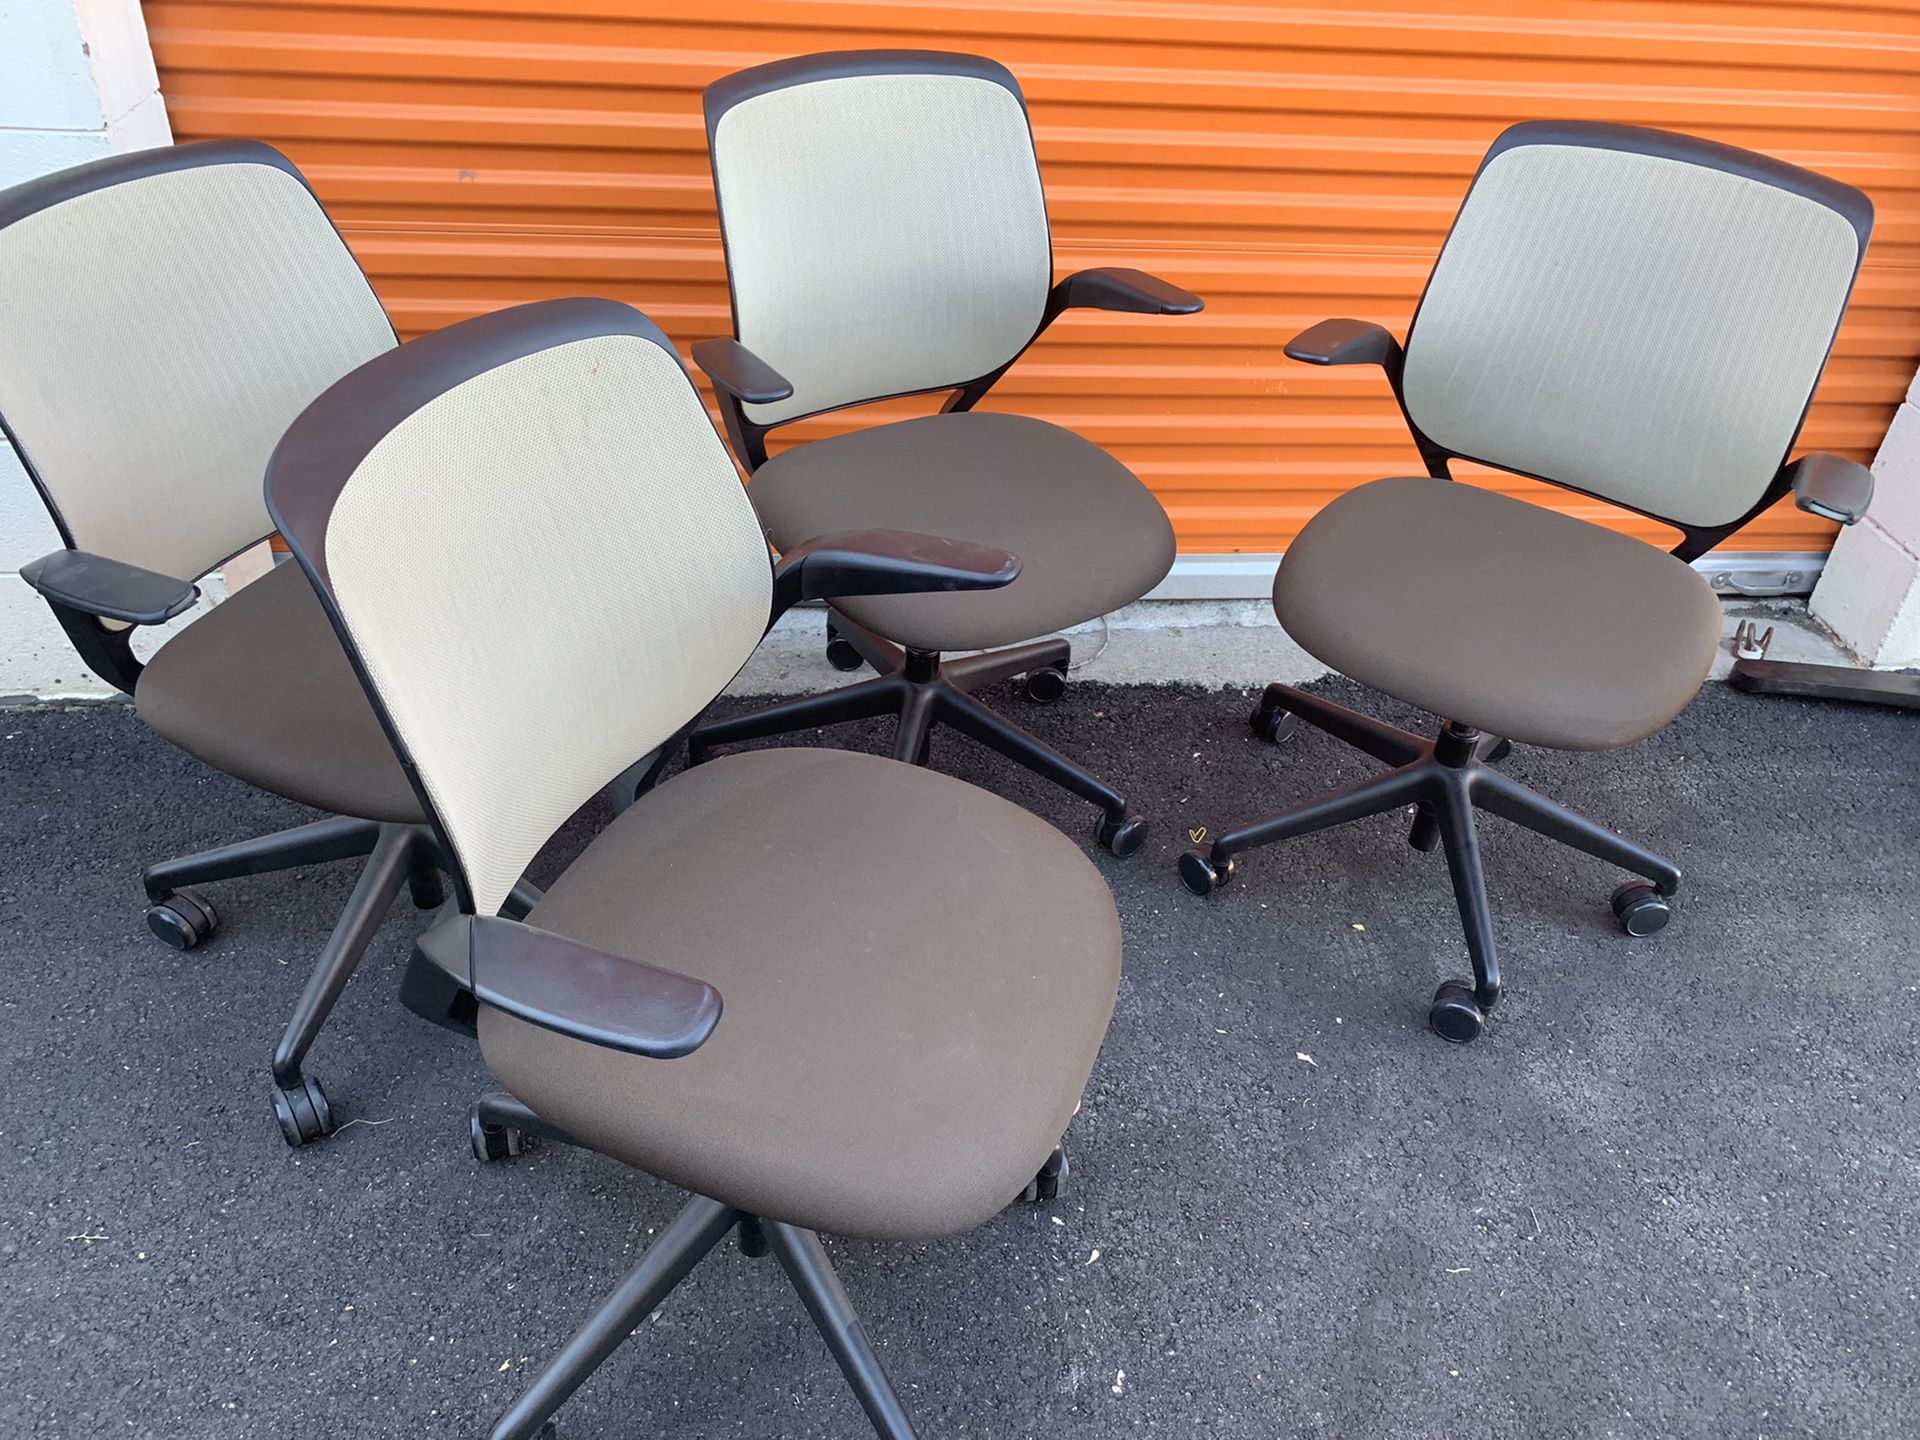 Steelcase cobi turnstone office chairs used msrp$500